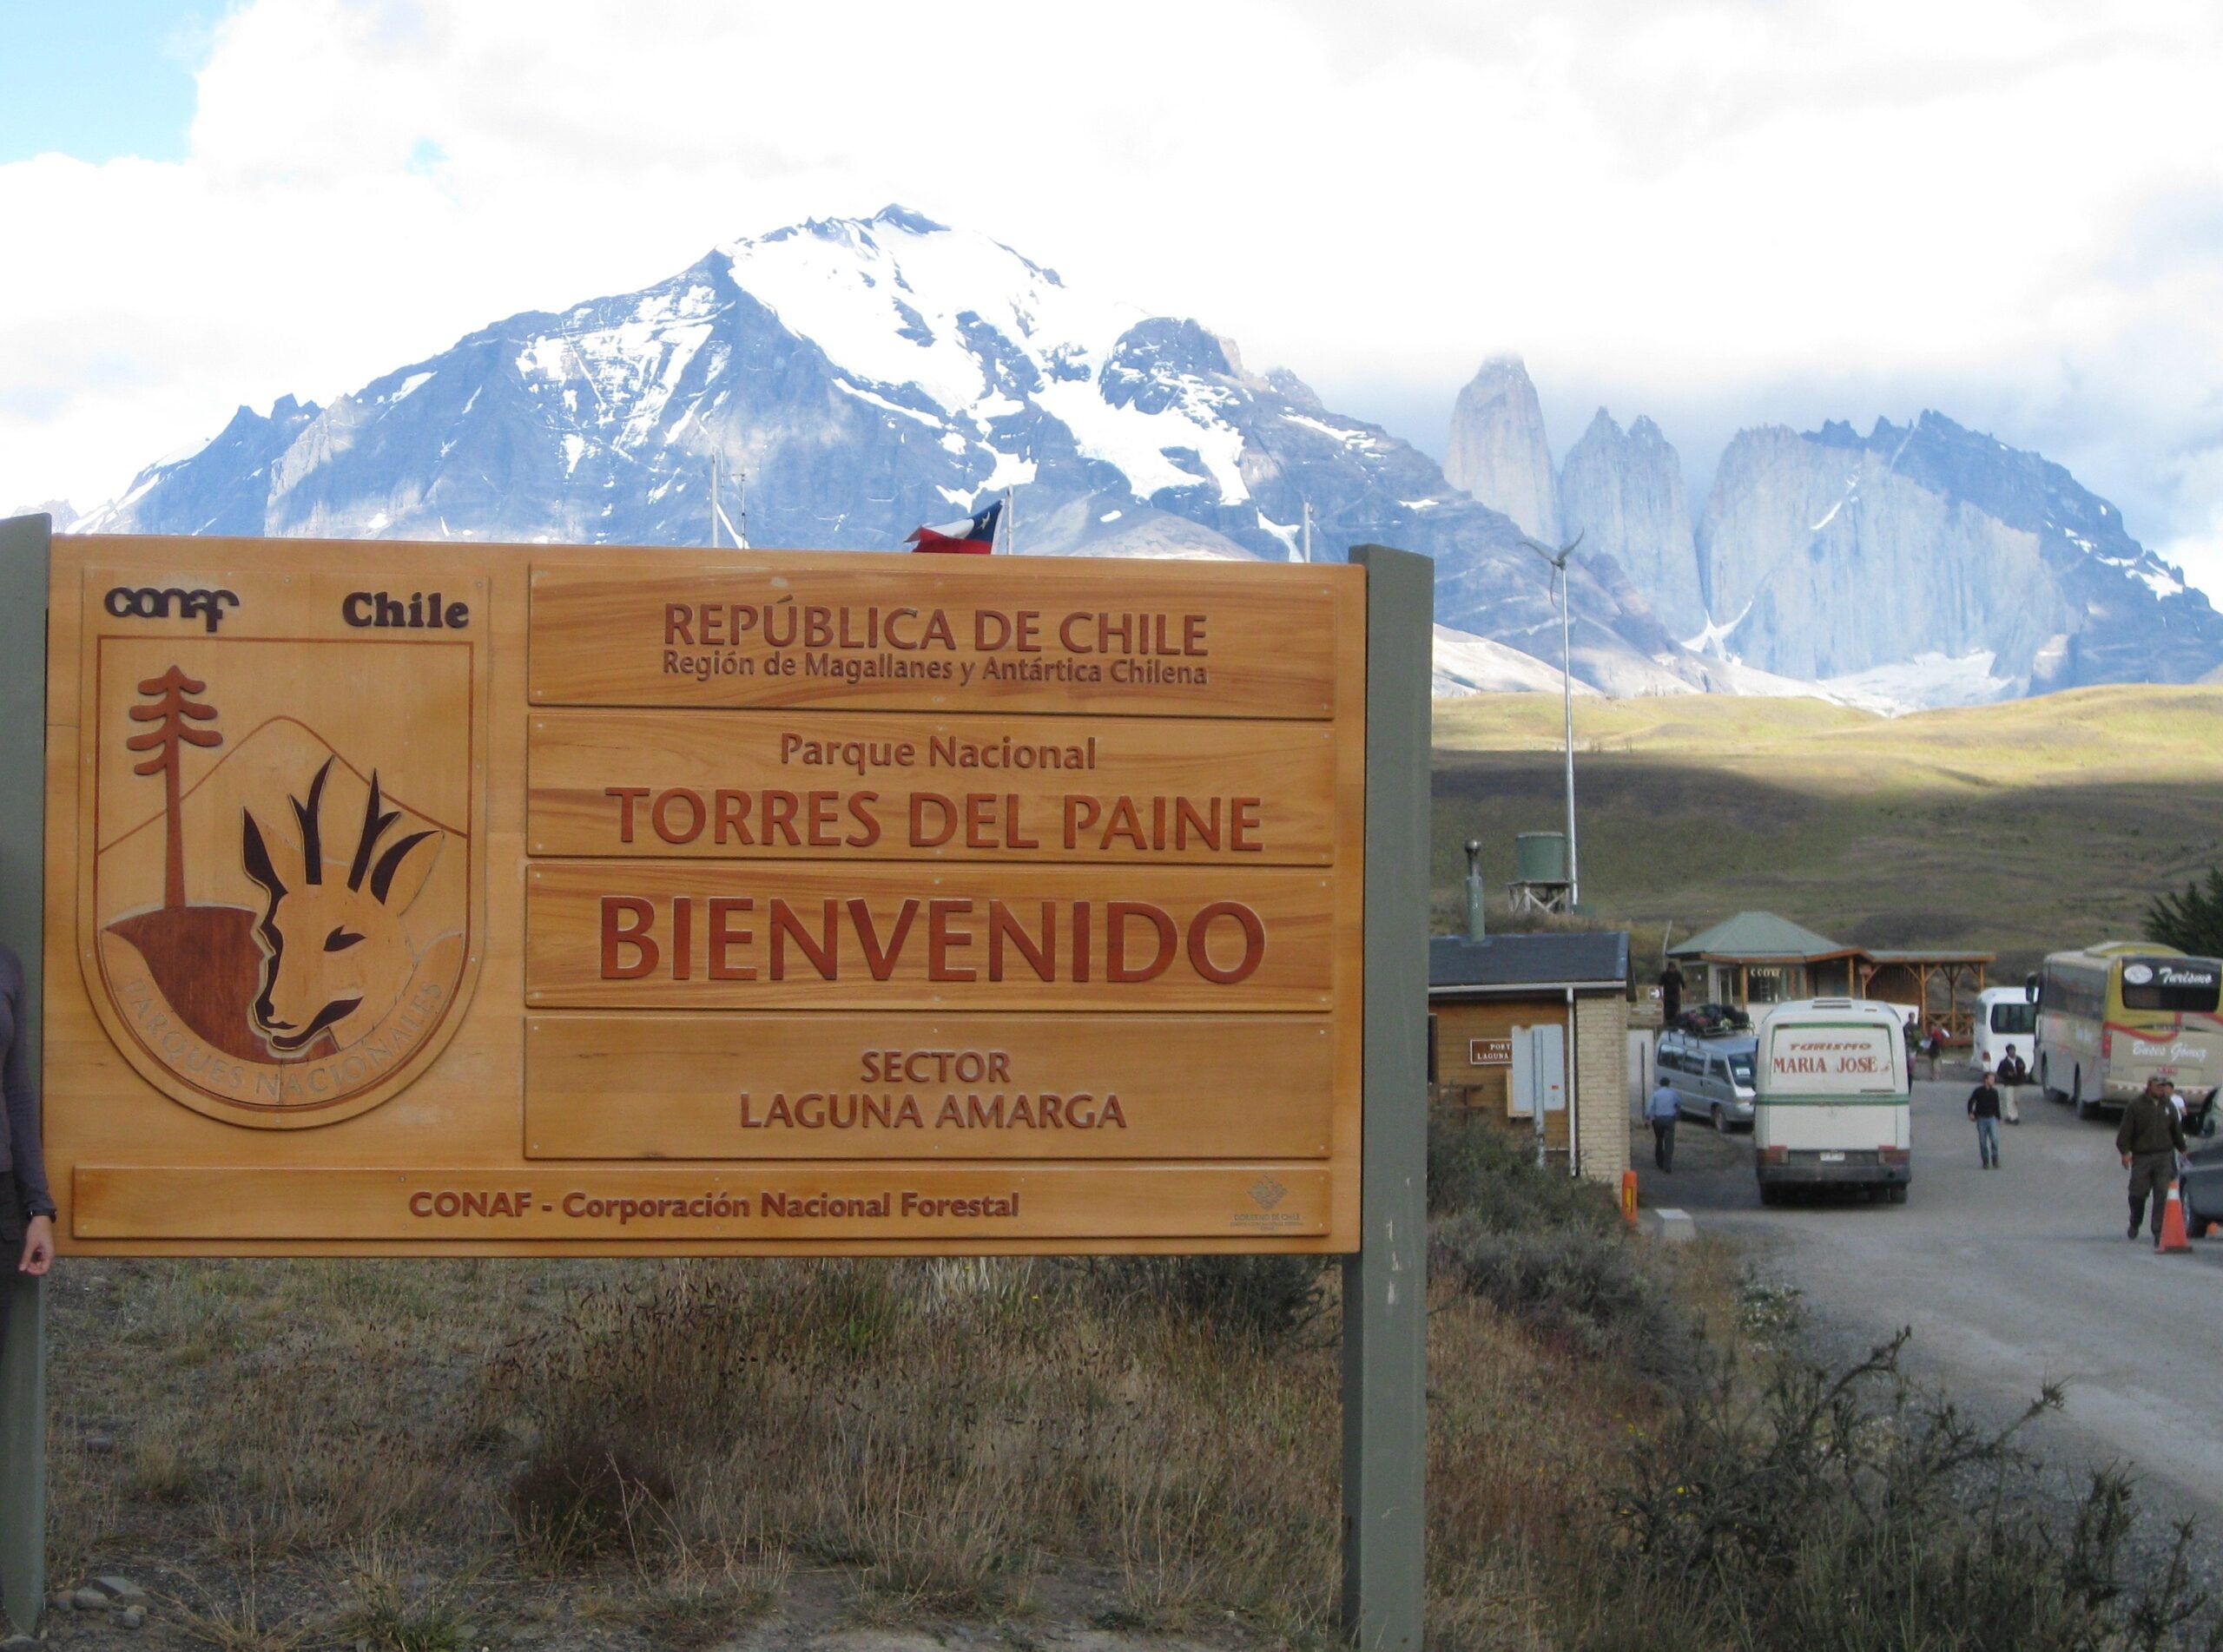 Entrance sign to Torres del Paine National Park in Chile